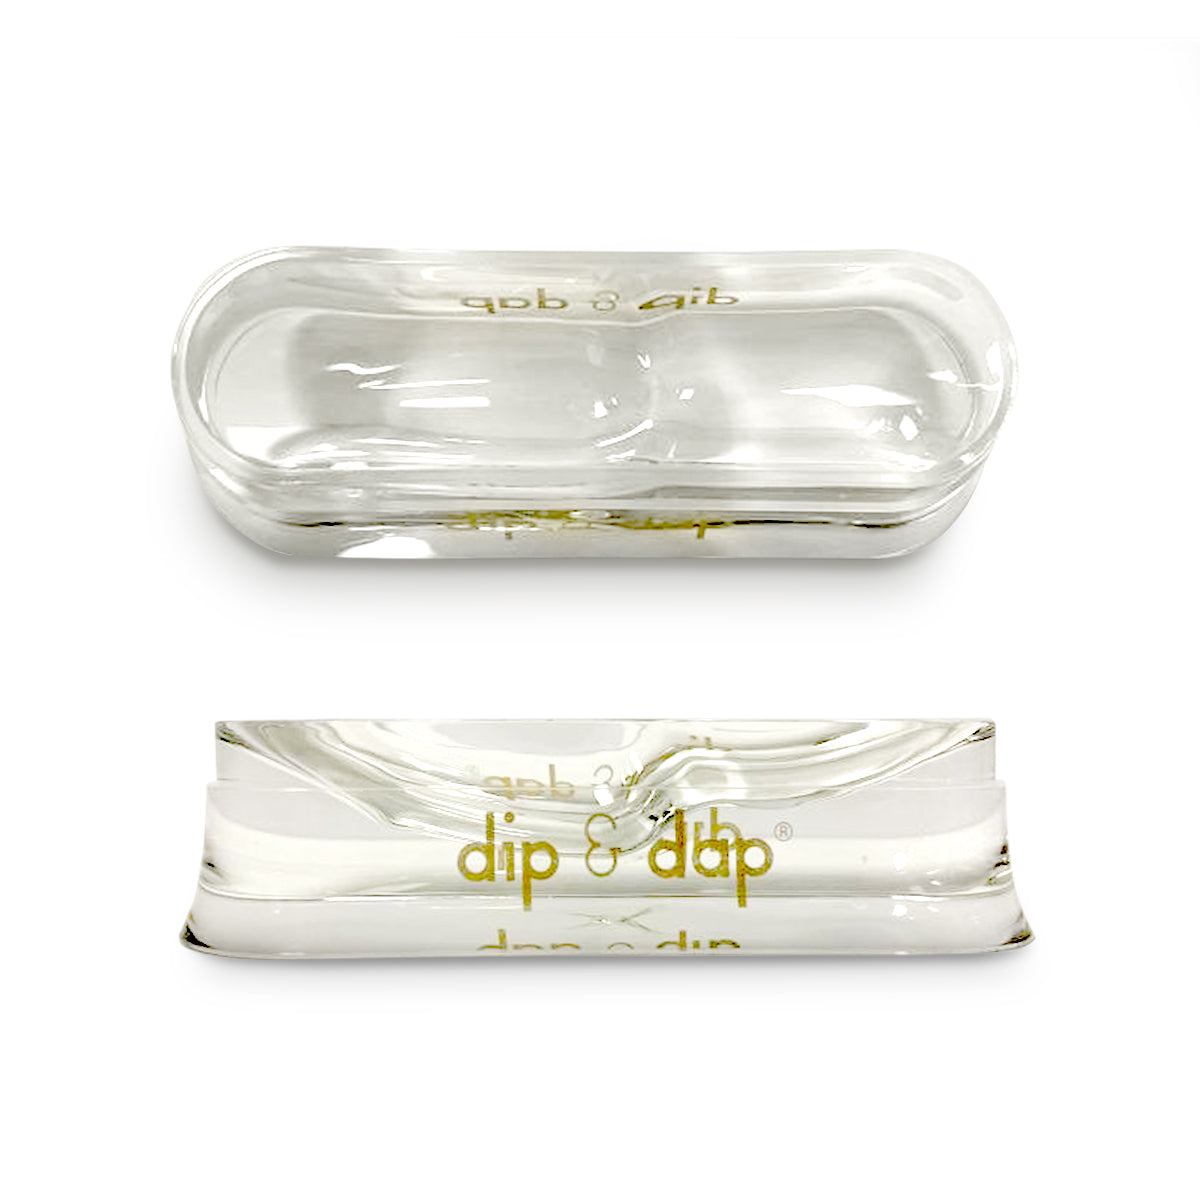 iGel Beauty French Tip Dip Case